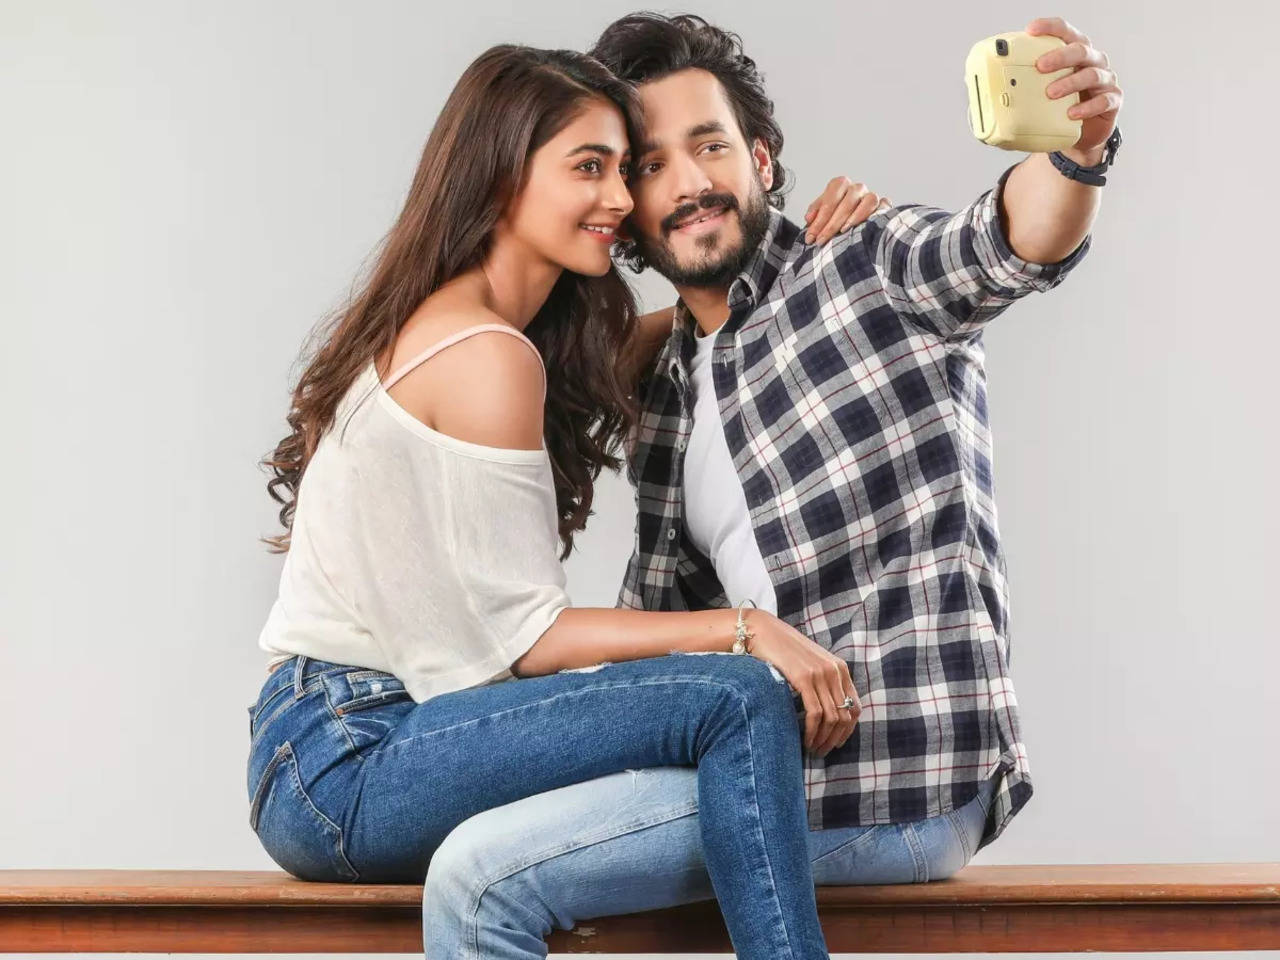 Most Eligible Bachelor' day 4 box office collection: Akhil Akkineni, Pooja  Hegde's film earns Rs 24 crore after first weekend | Telugu Movie News -  Times of India